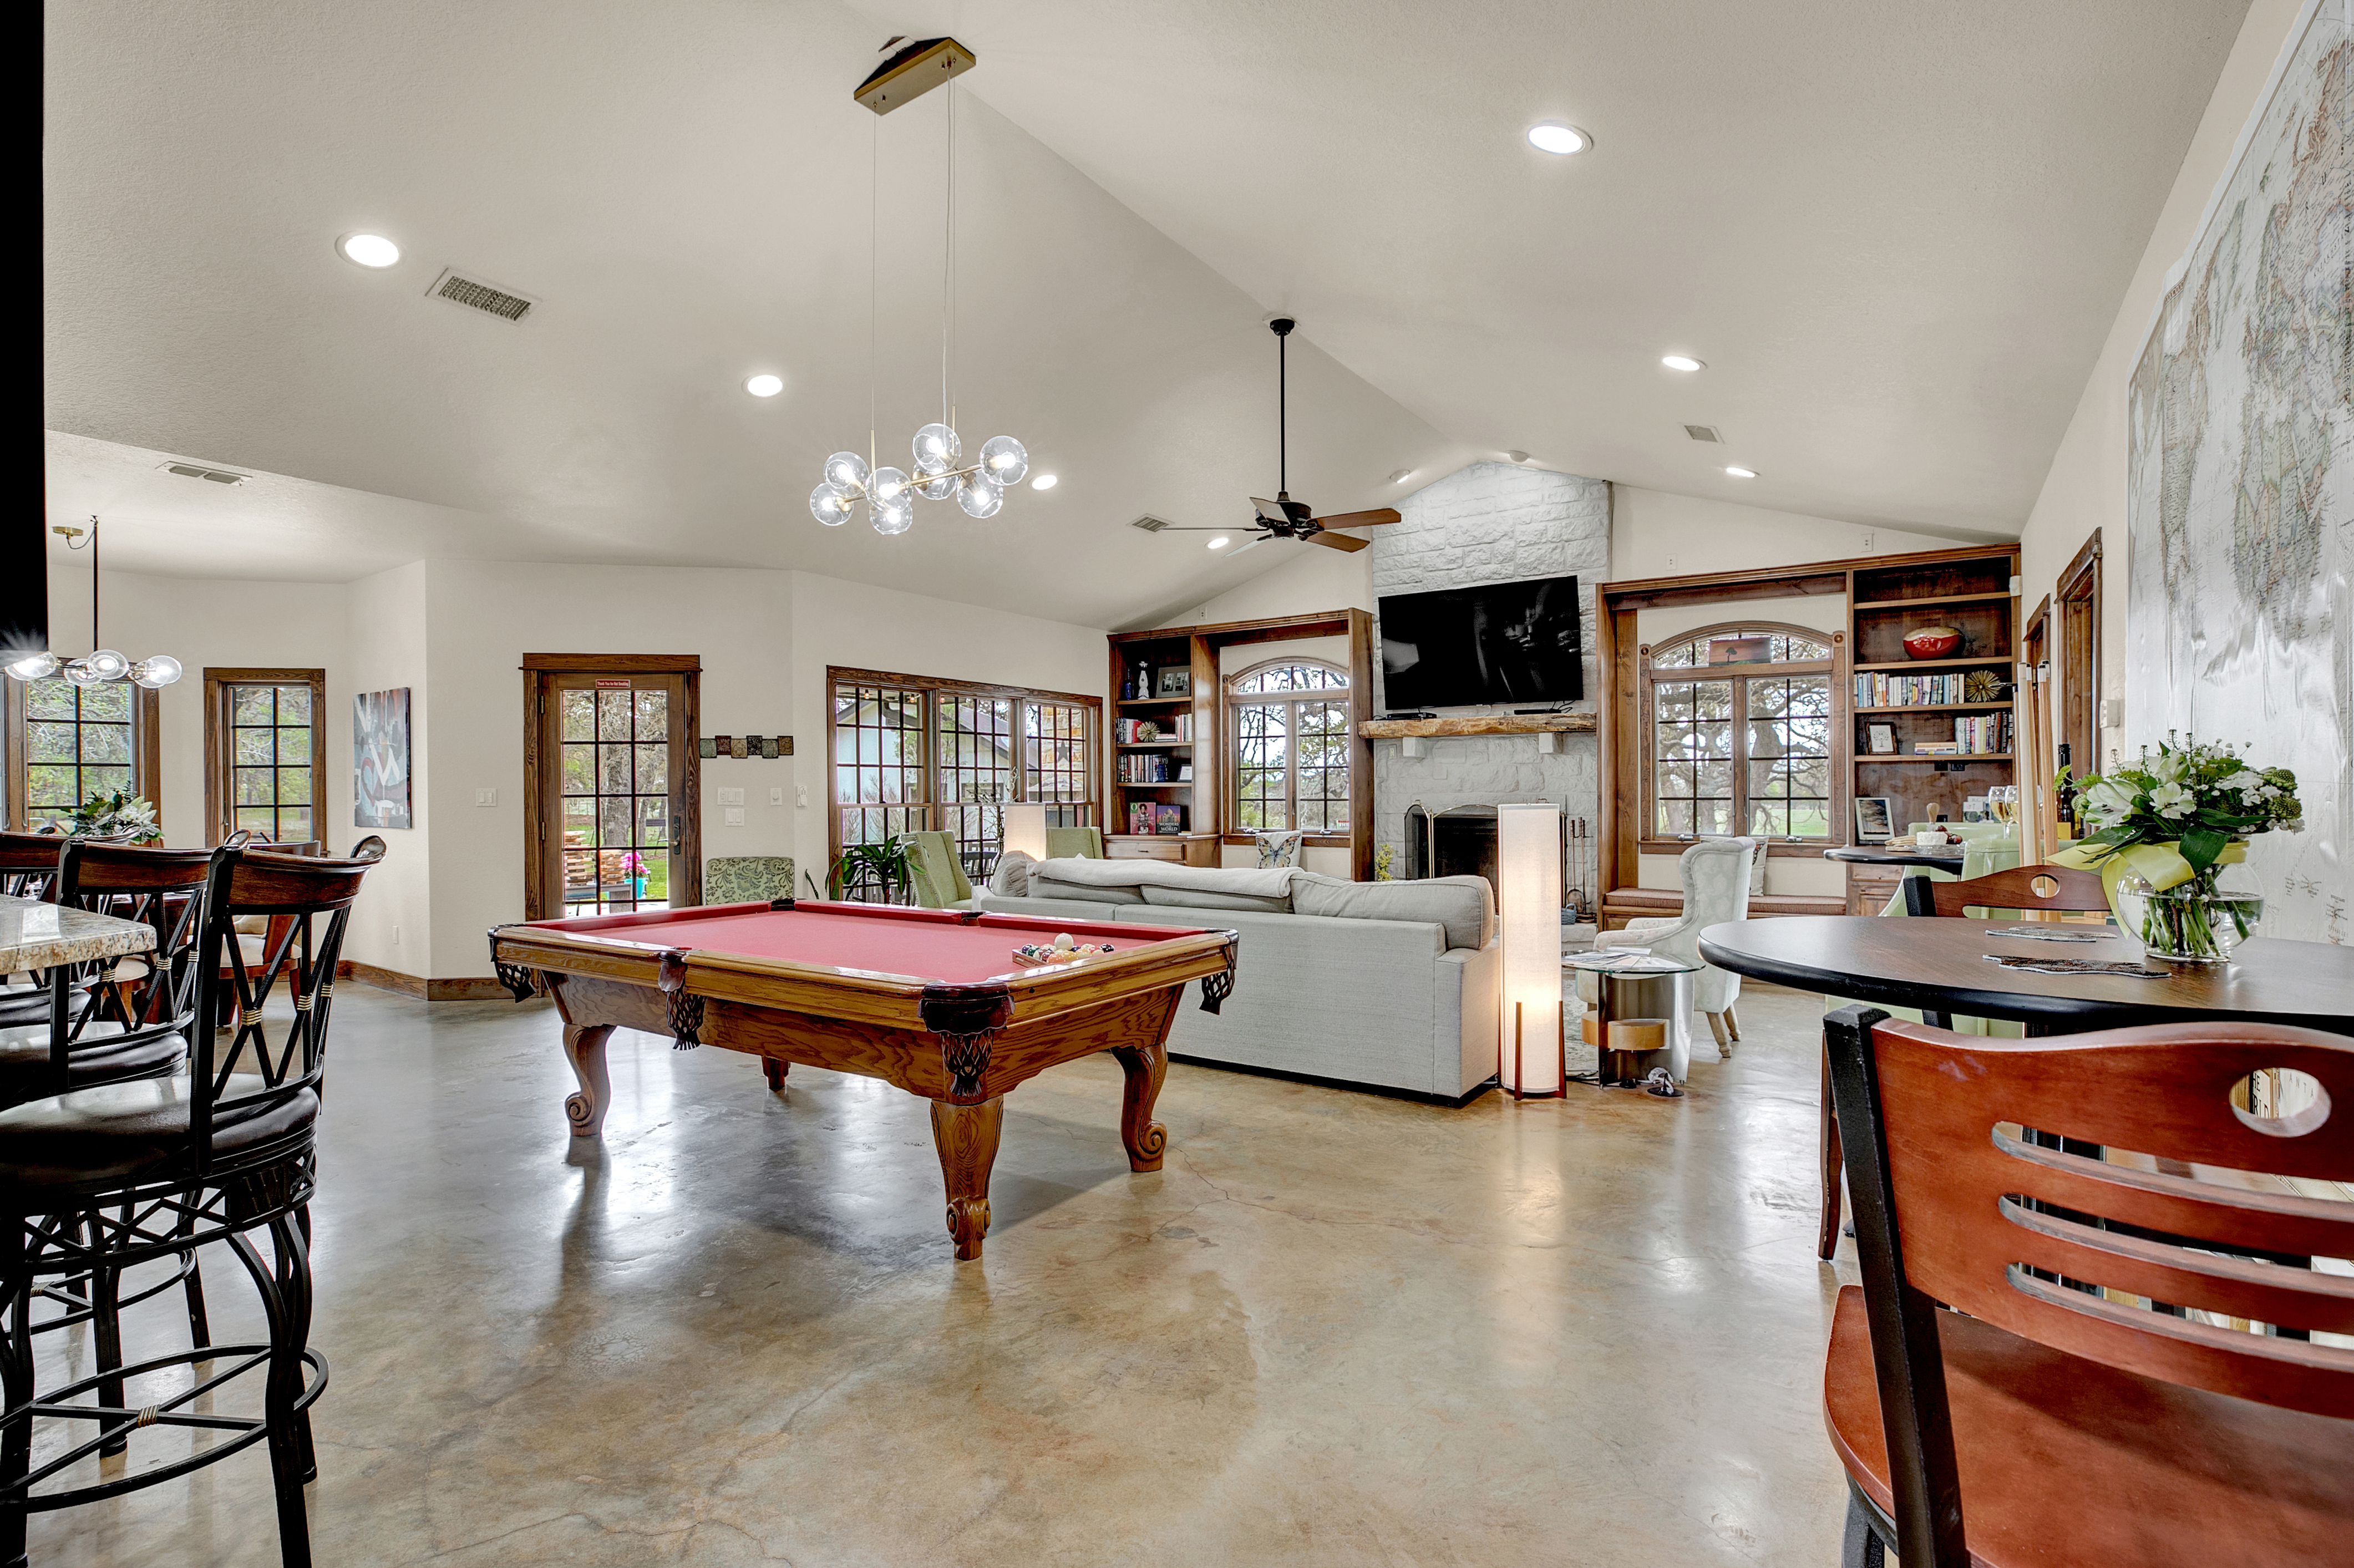 Make amazing memories in this stunning large living room with pool table and big screen TV! Perfect for friend and families to get together and unwind after a long day of exploring Fredericksburg!